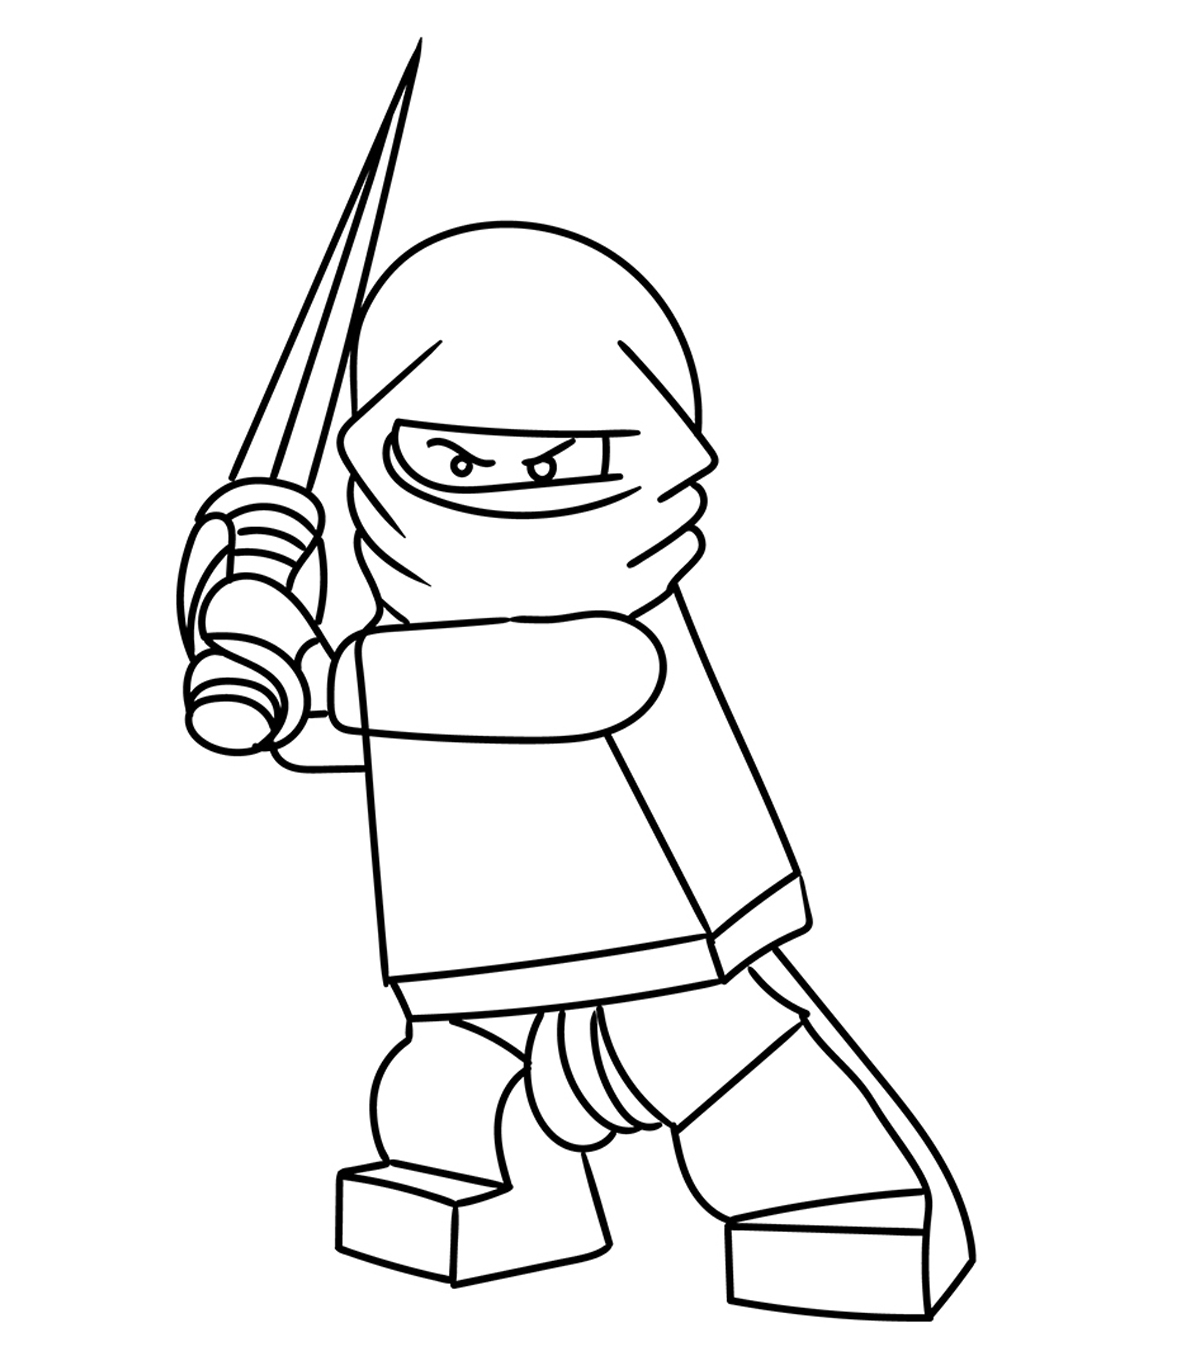 20 Ninja Coloring Pages For Your Little Ones